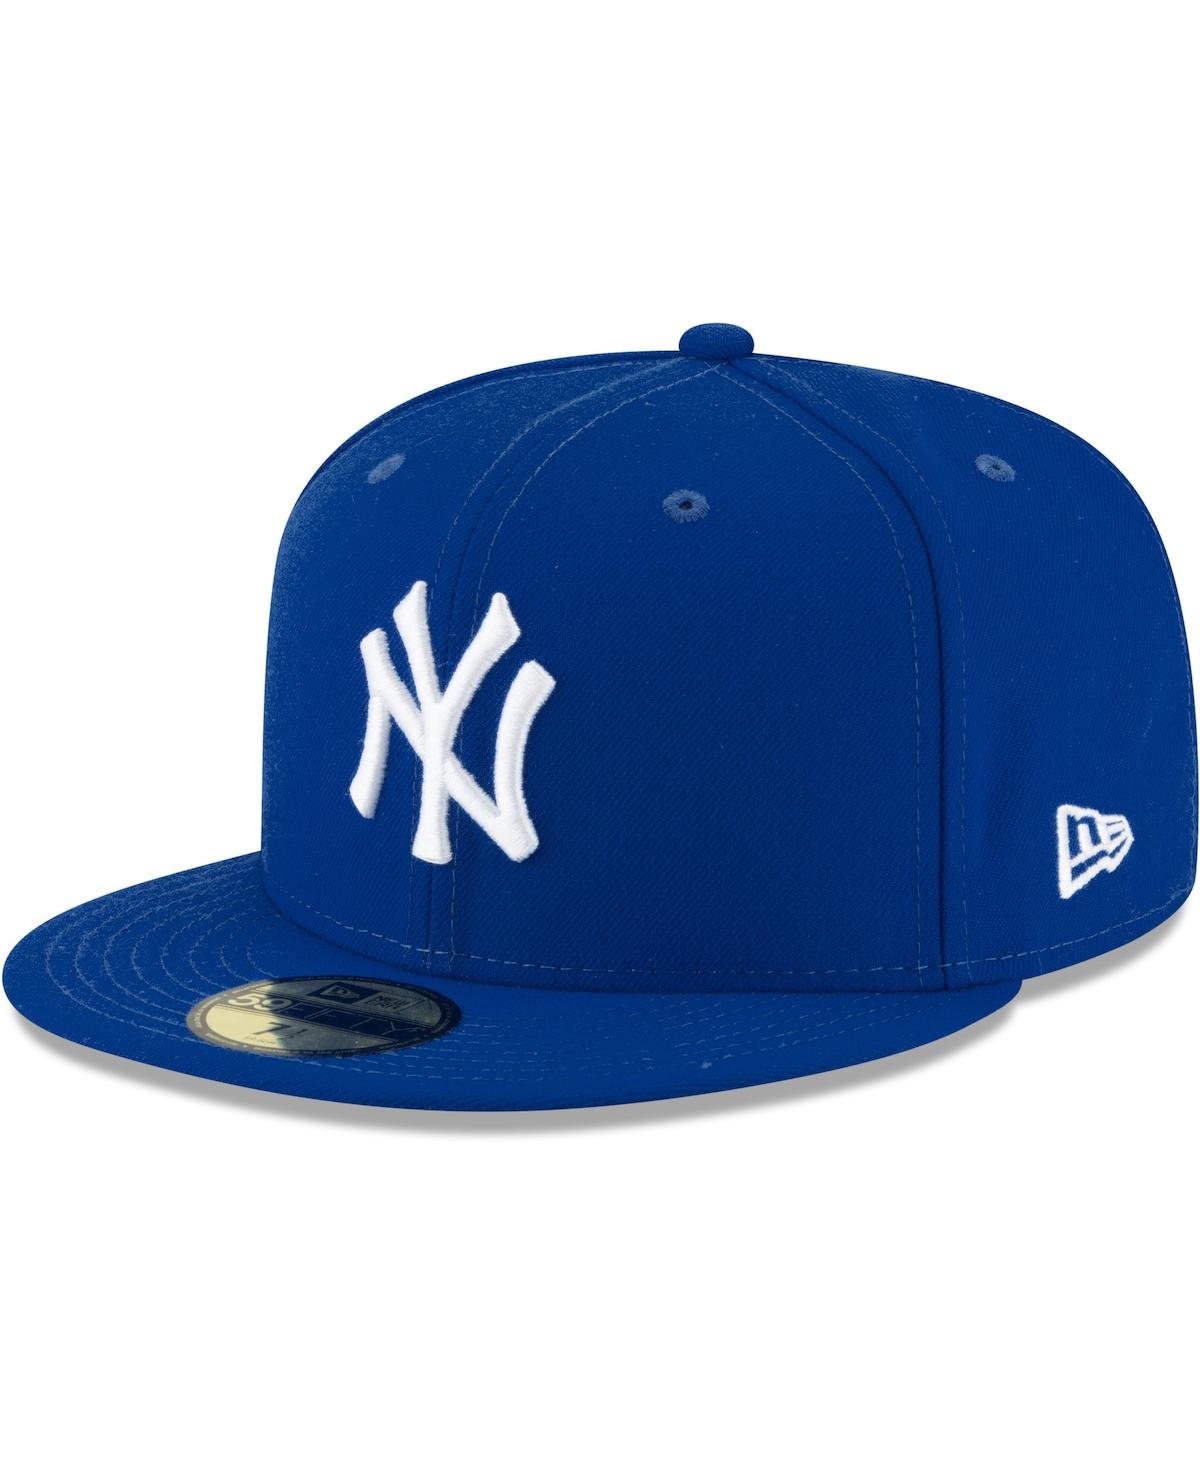 Men's Royal New York Yankees Logo White 59FIFTY Fitted Hat - Royal